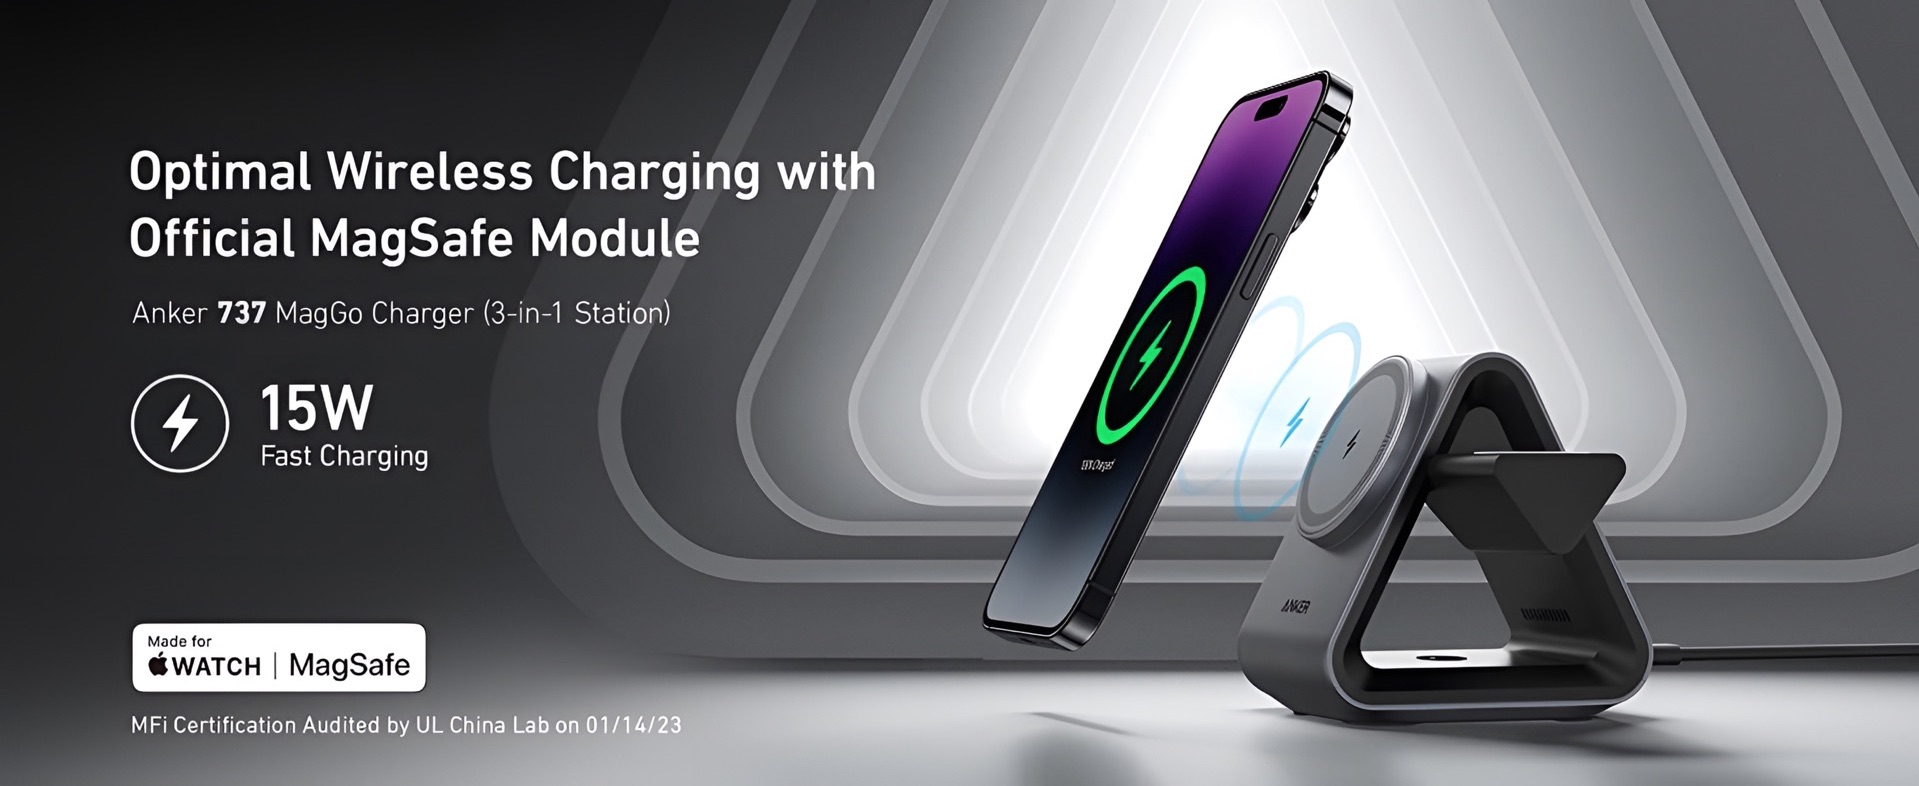 Anker 737 MagGo Charger (3-in-1 Station) with MFi-Certified 15W Max Fast Charging